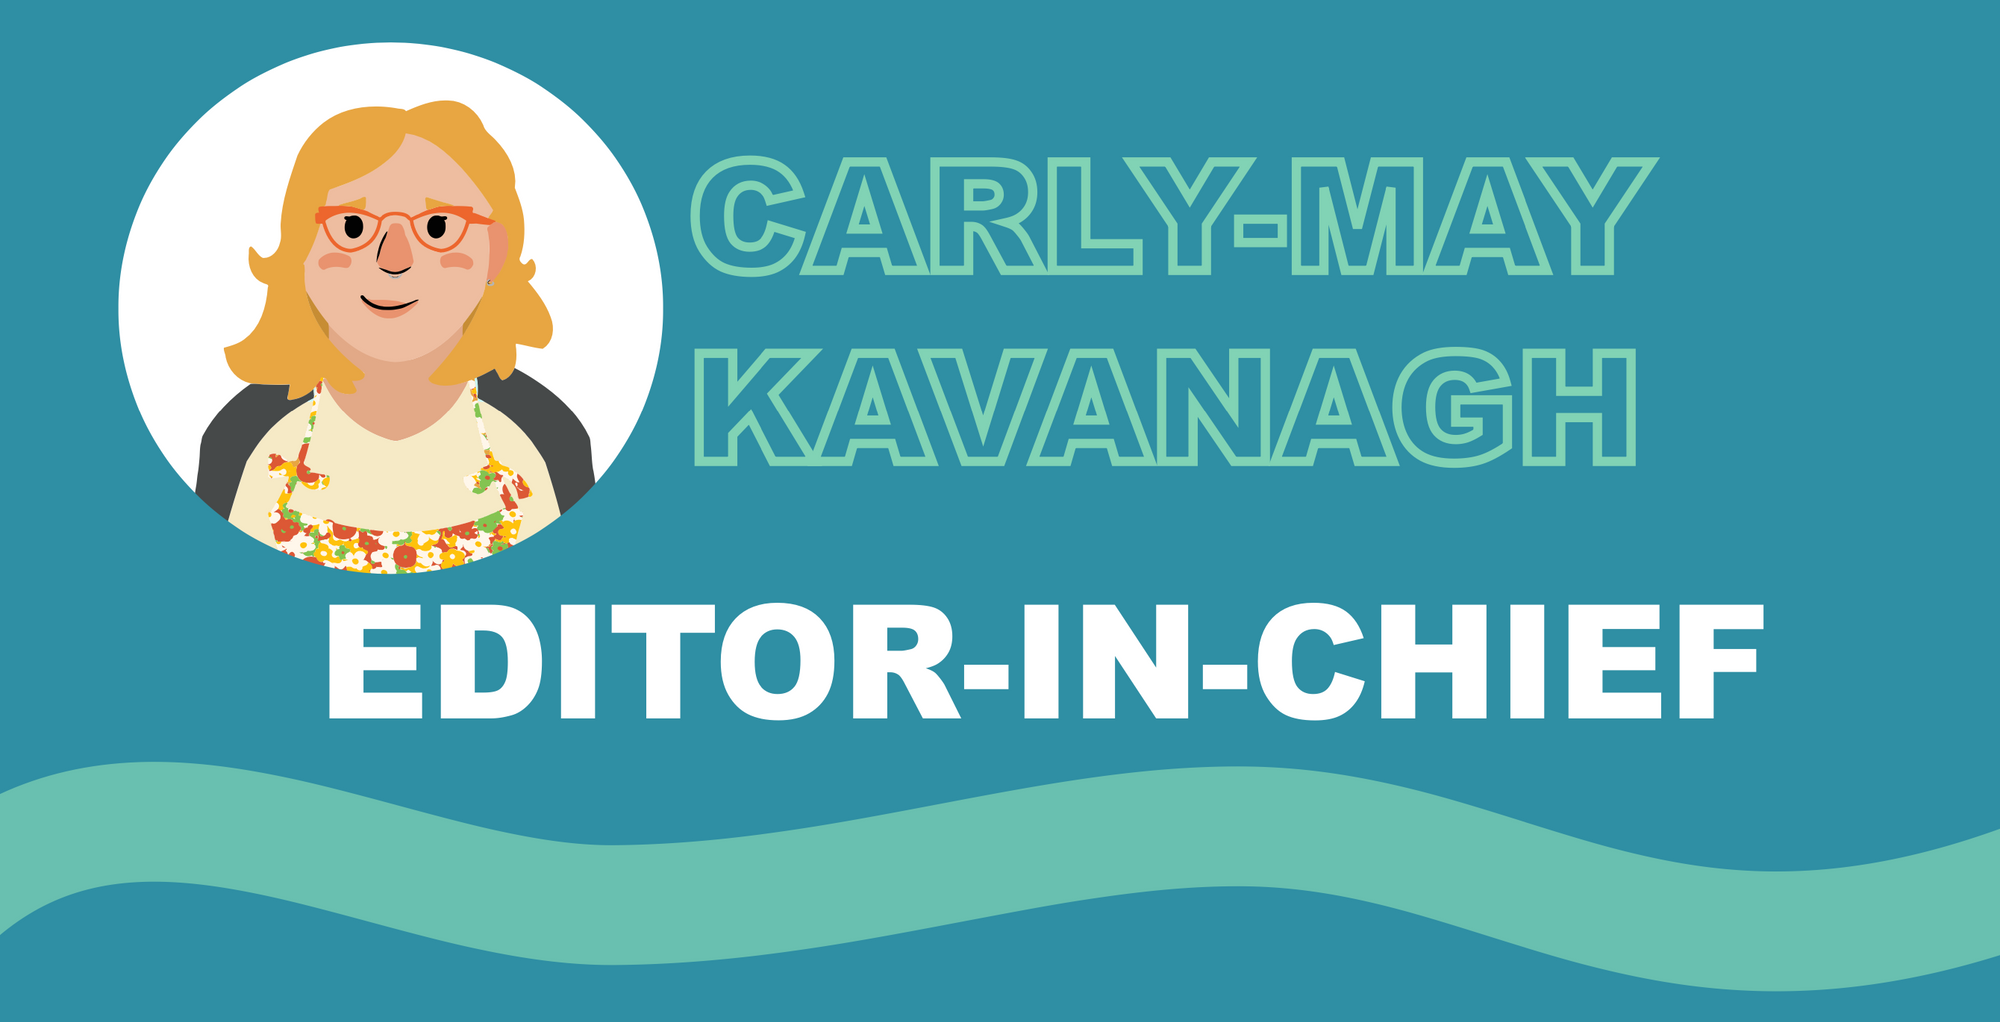 Carly-May Kavanagh, Editor-in-Chief